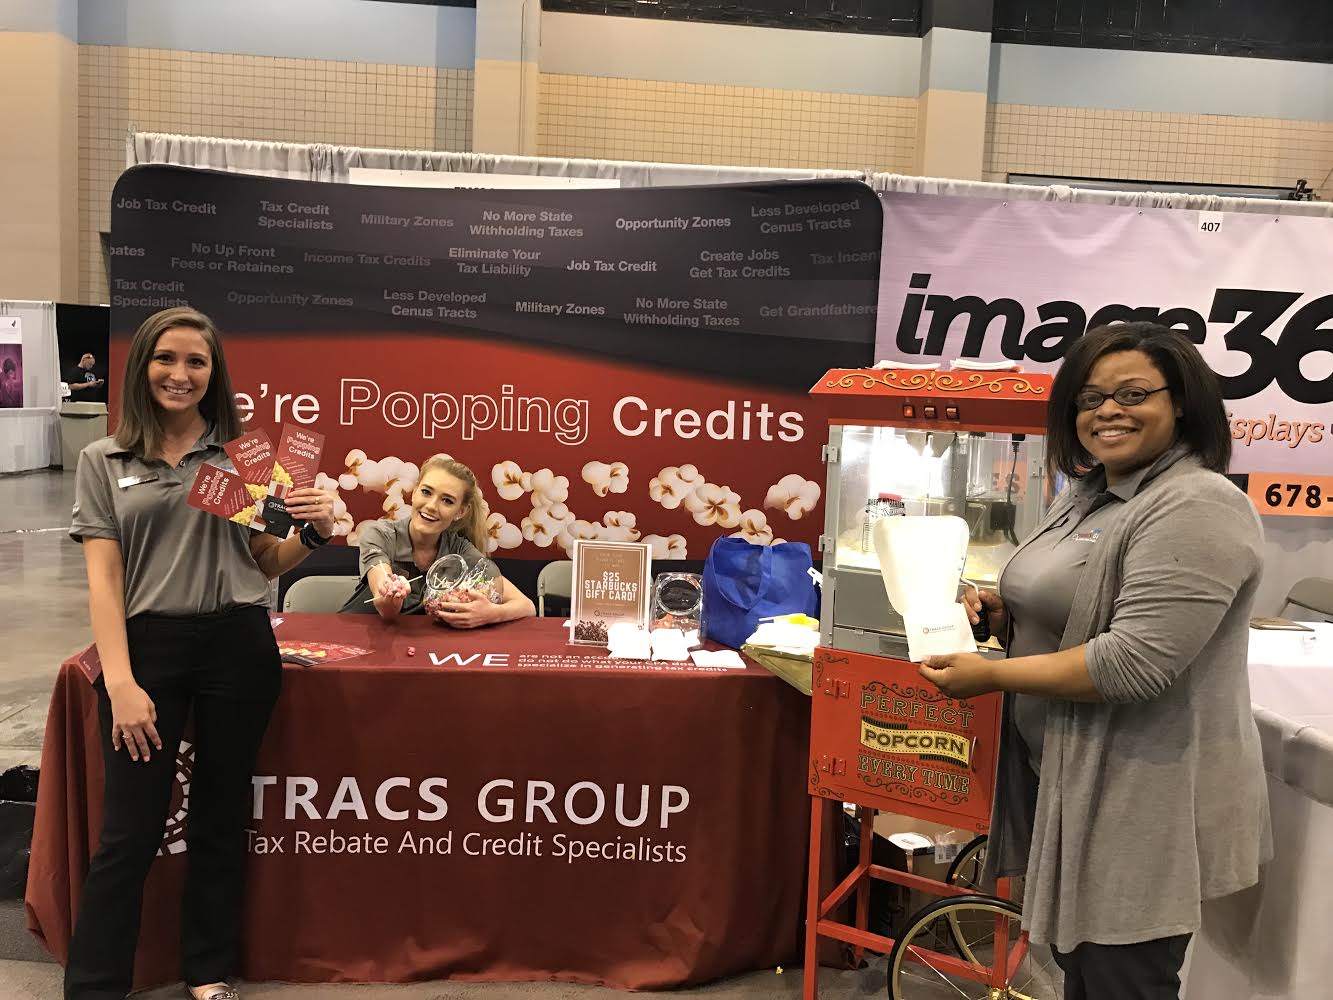 Throwback: Poppin’ Credits with TRACS Group